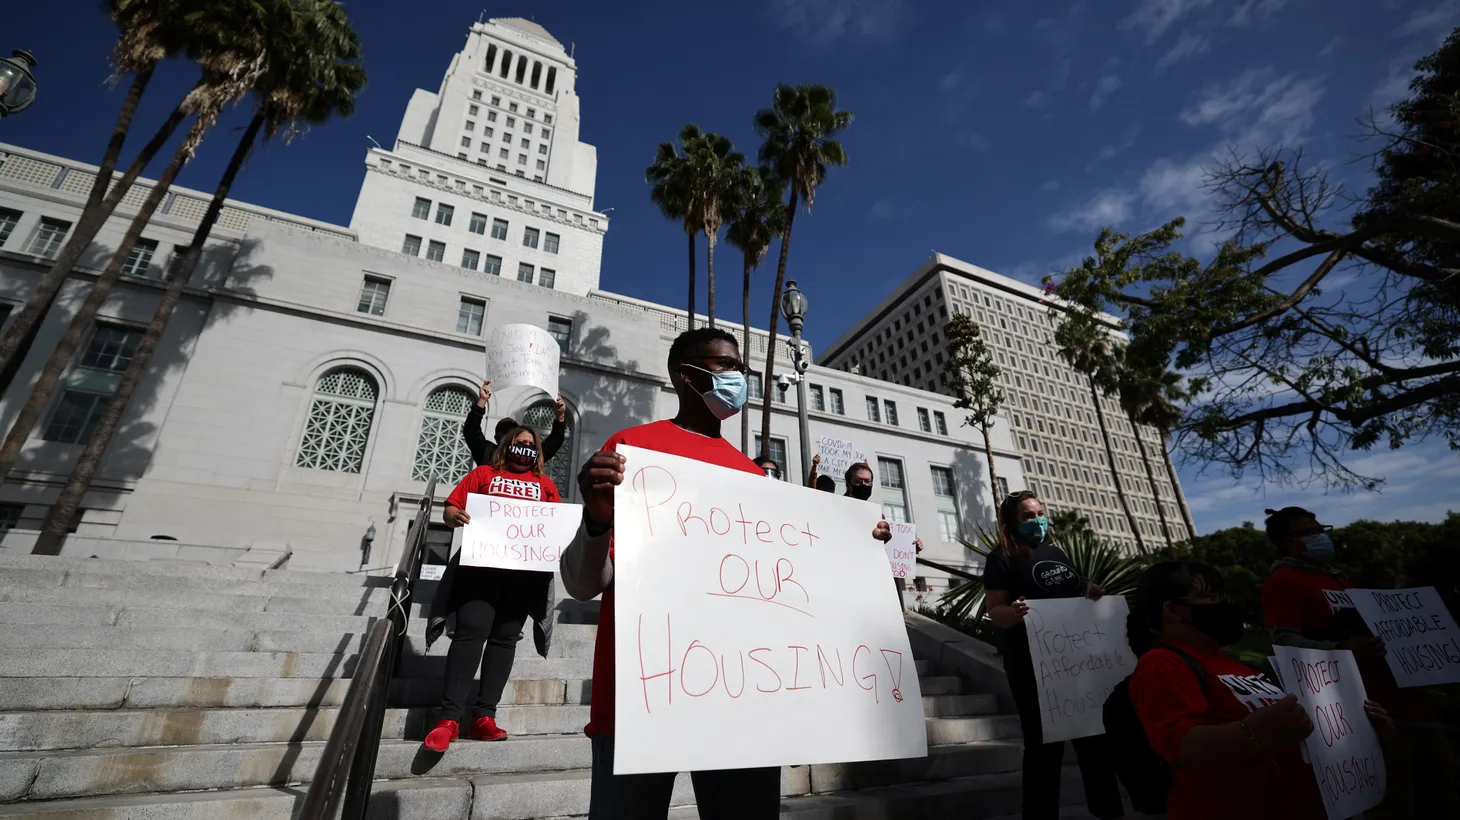 Activists outside LA City Hall hold signs that say, “Protect our housing!” November 12, 2020.